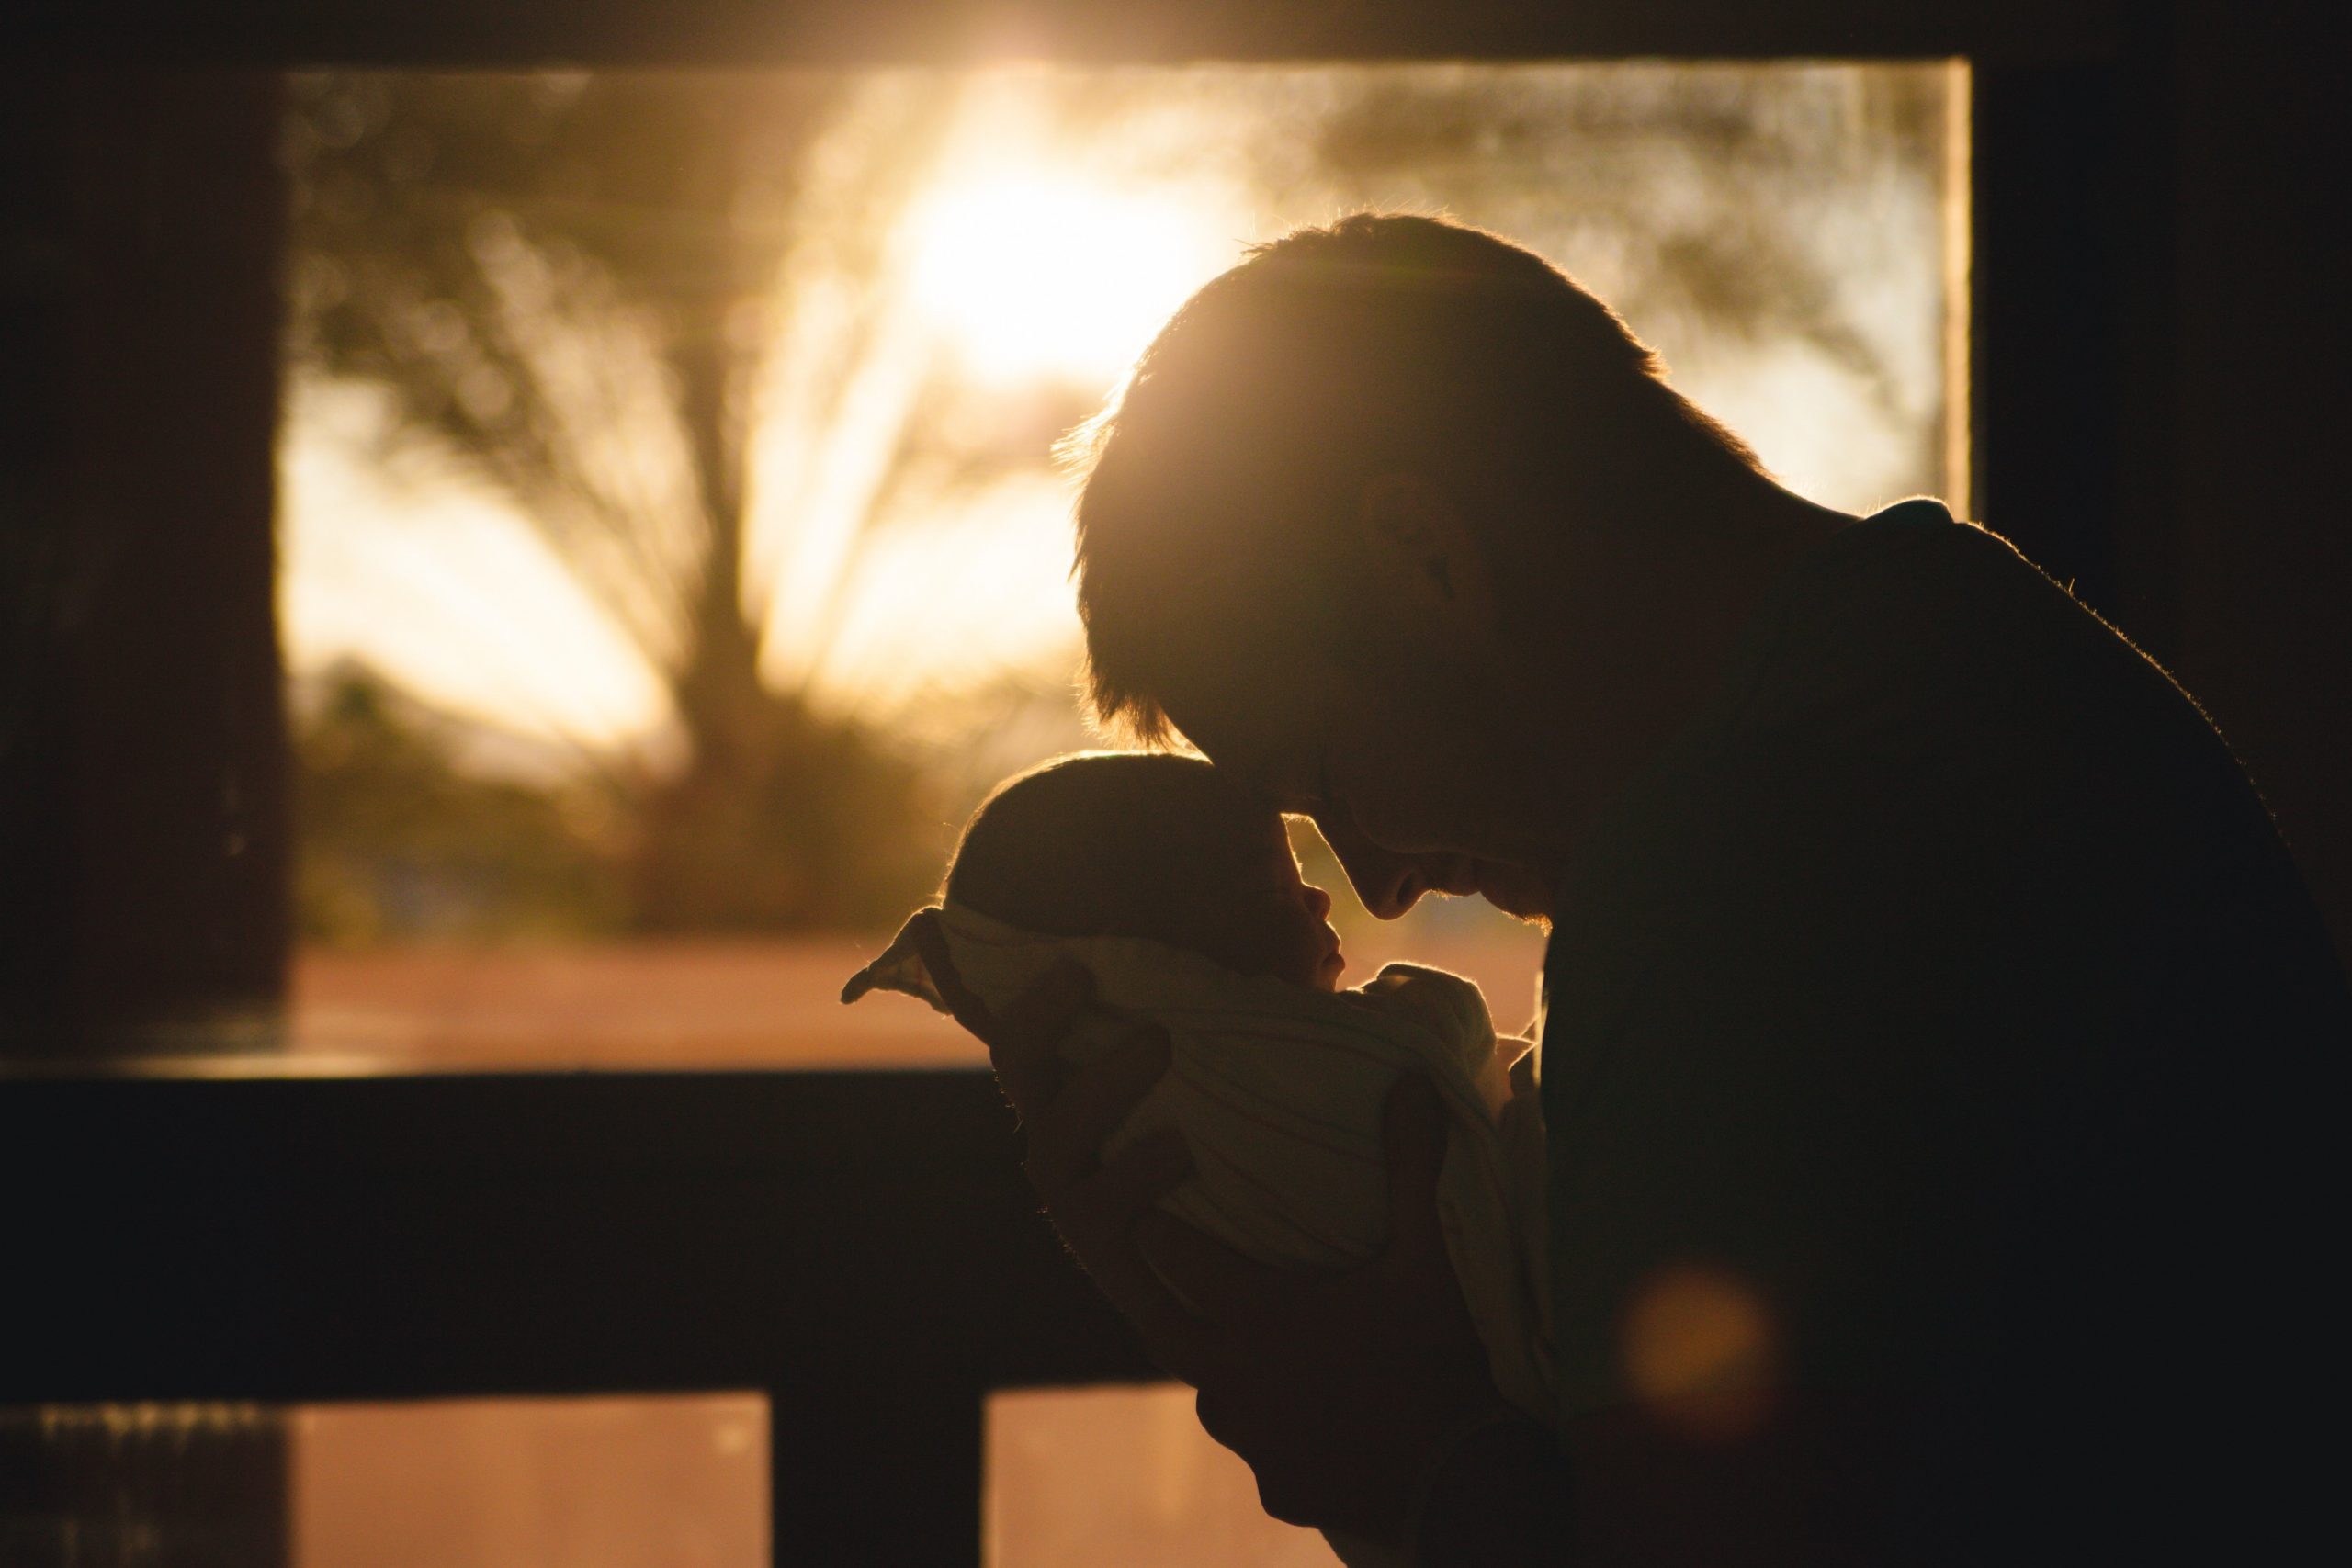 A father cuddling his Baby silhouetted against the sunrise